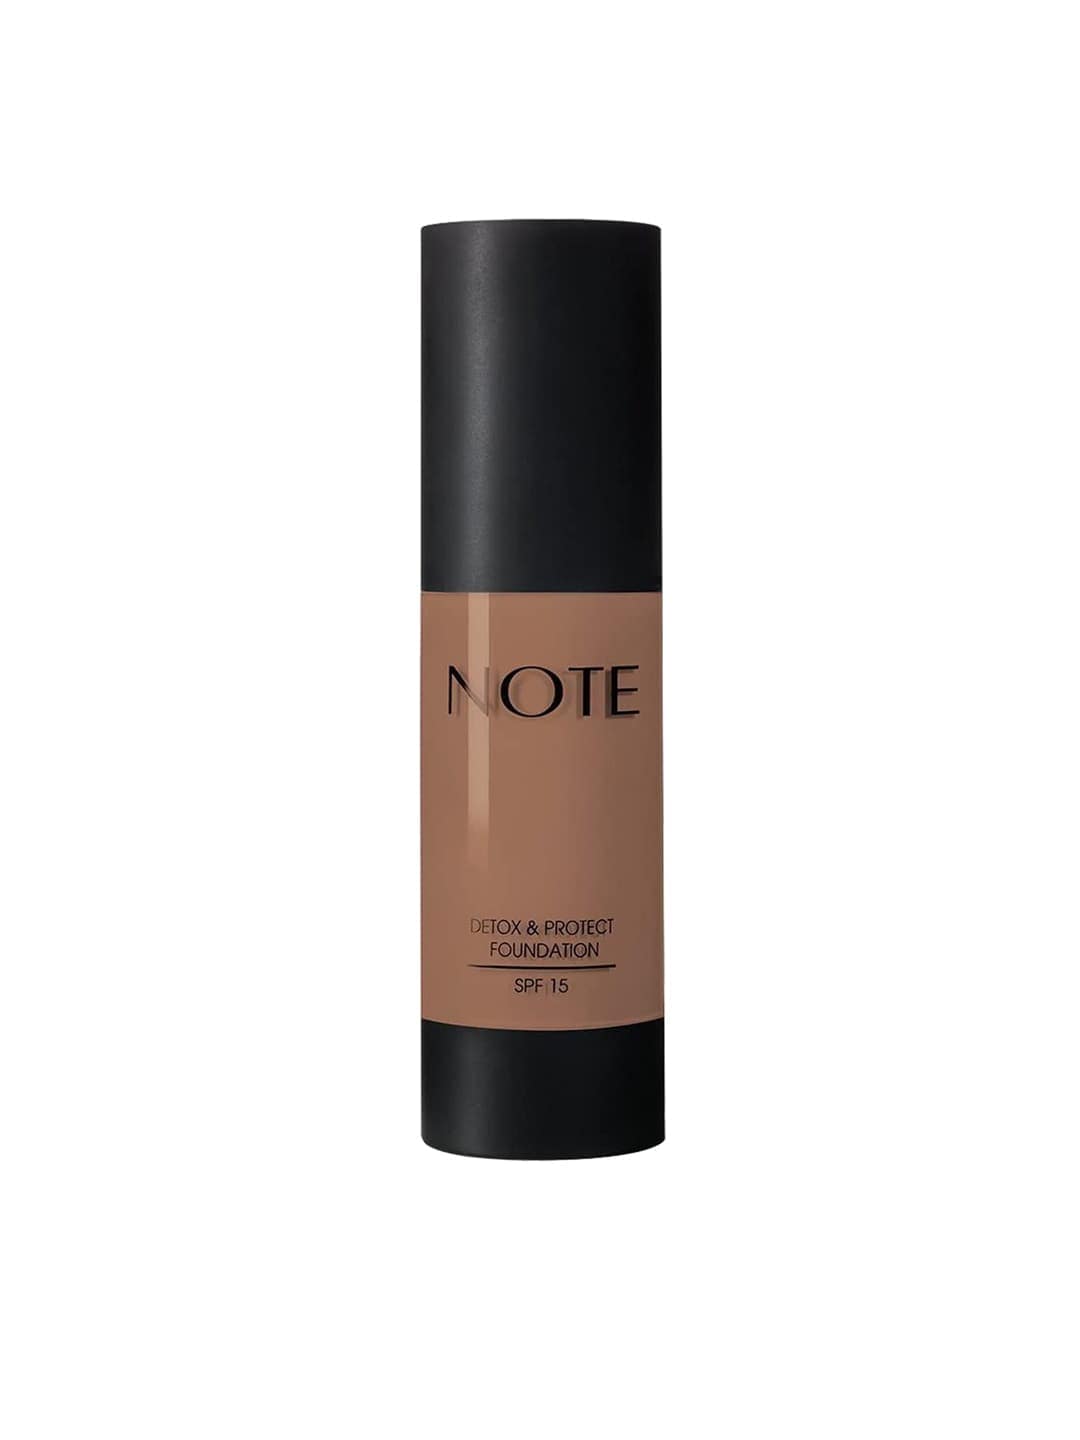 Note Detox & Protect Foundation 107 - Toffee 35 ml Price in India